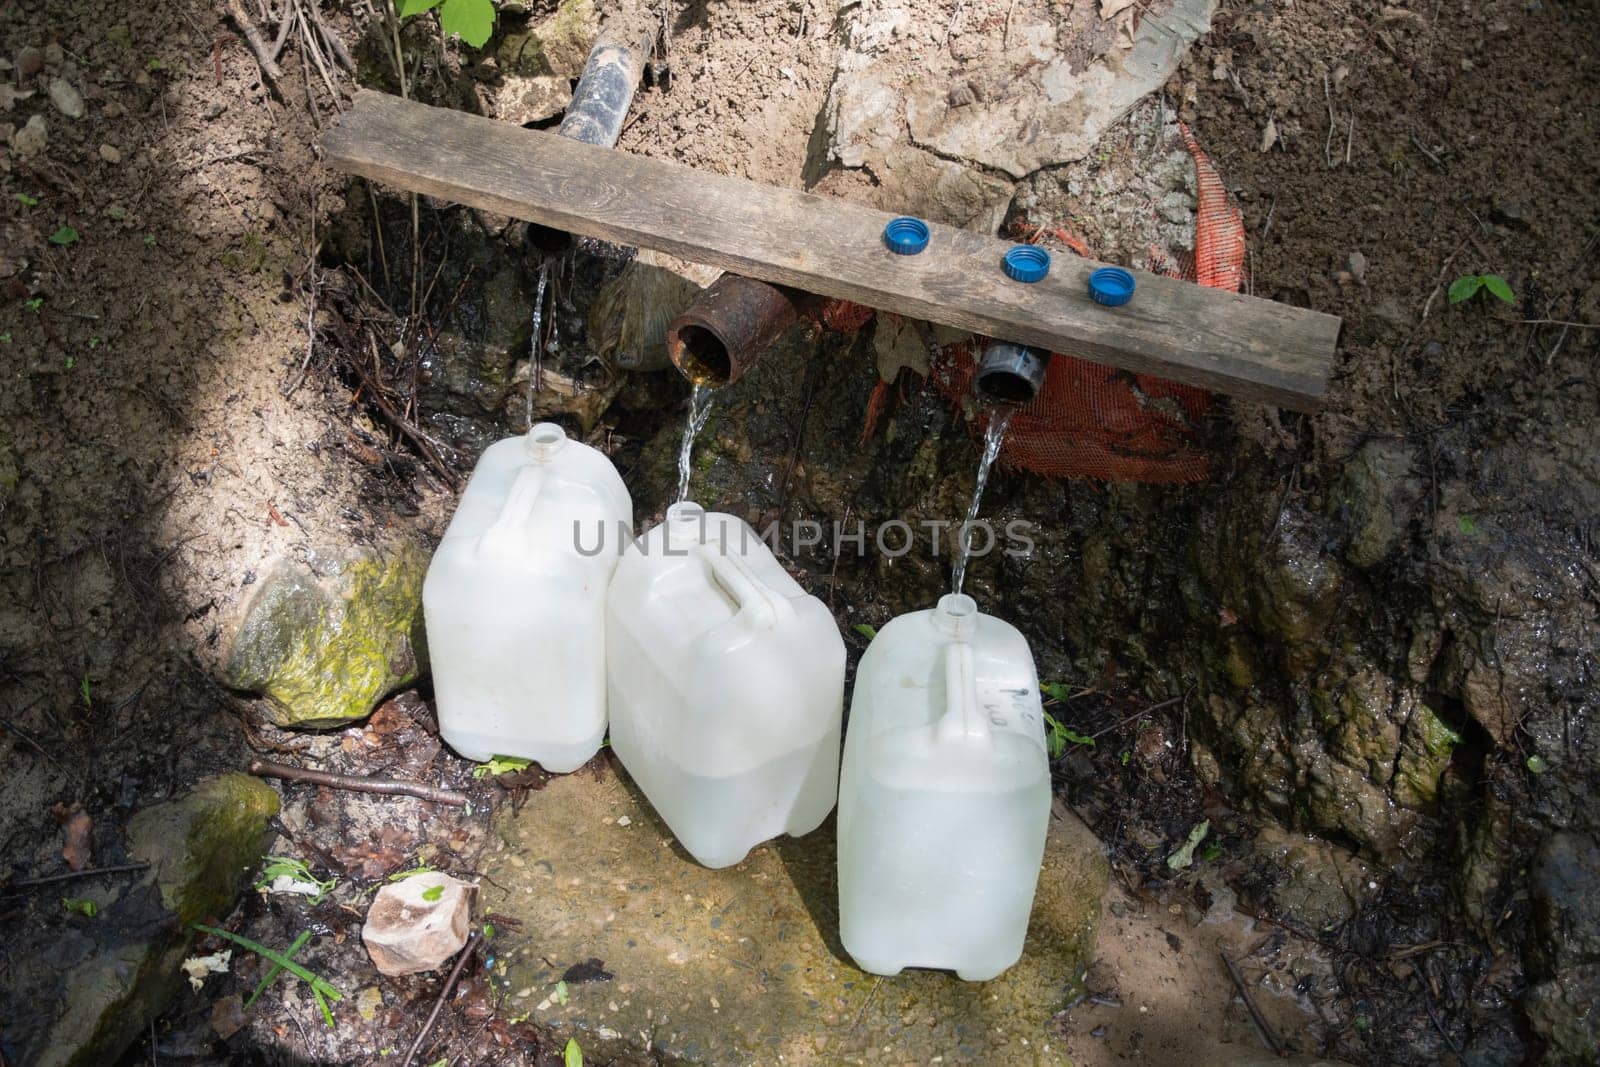 An underground source of clean fresh water, filled canisters for a home supply of essential products by KaterinaDalemans